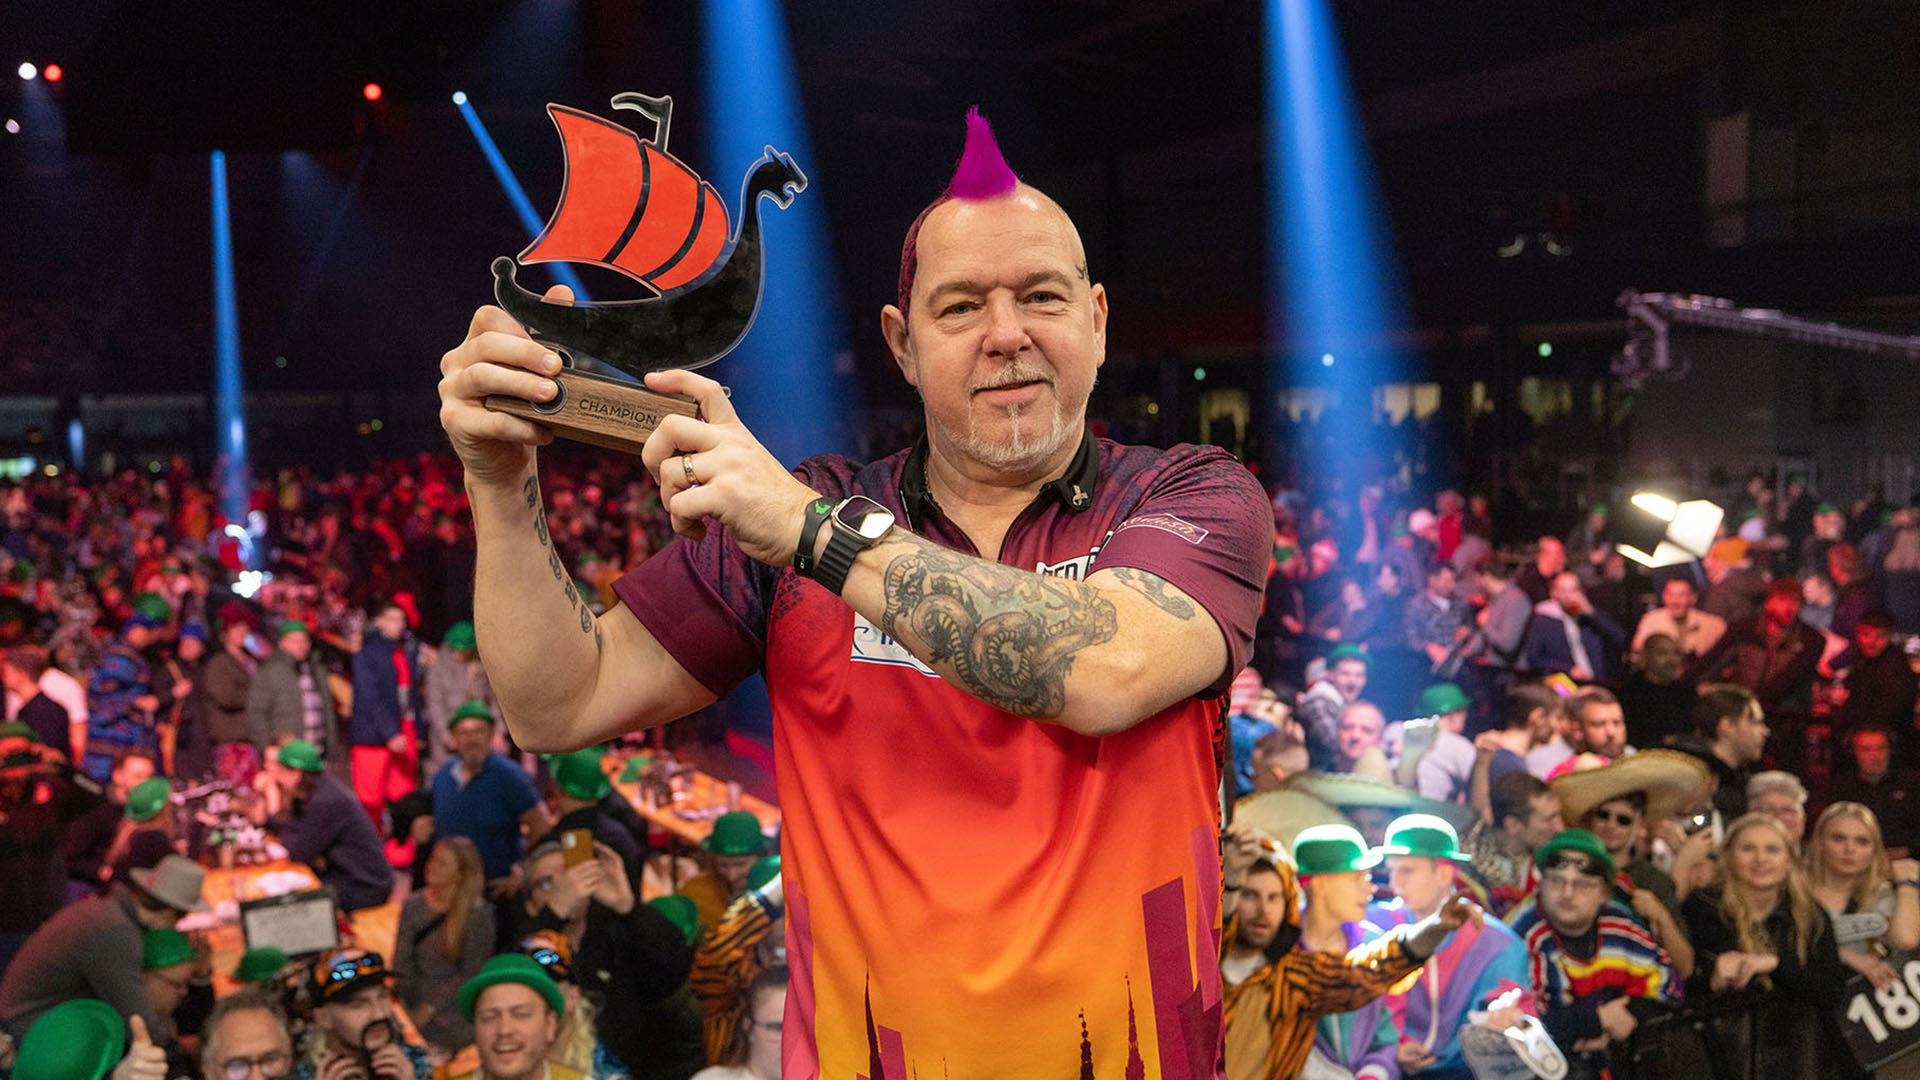 Darts results Peter Wright beats MVG, Michael Smith and Gerwyn Price to win Nordic Darts Masters